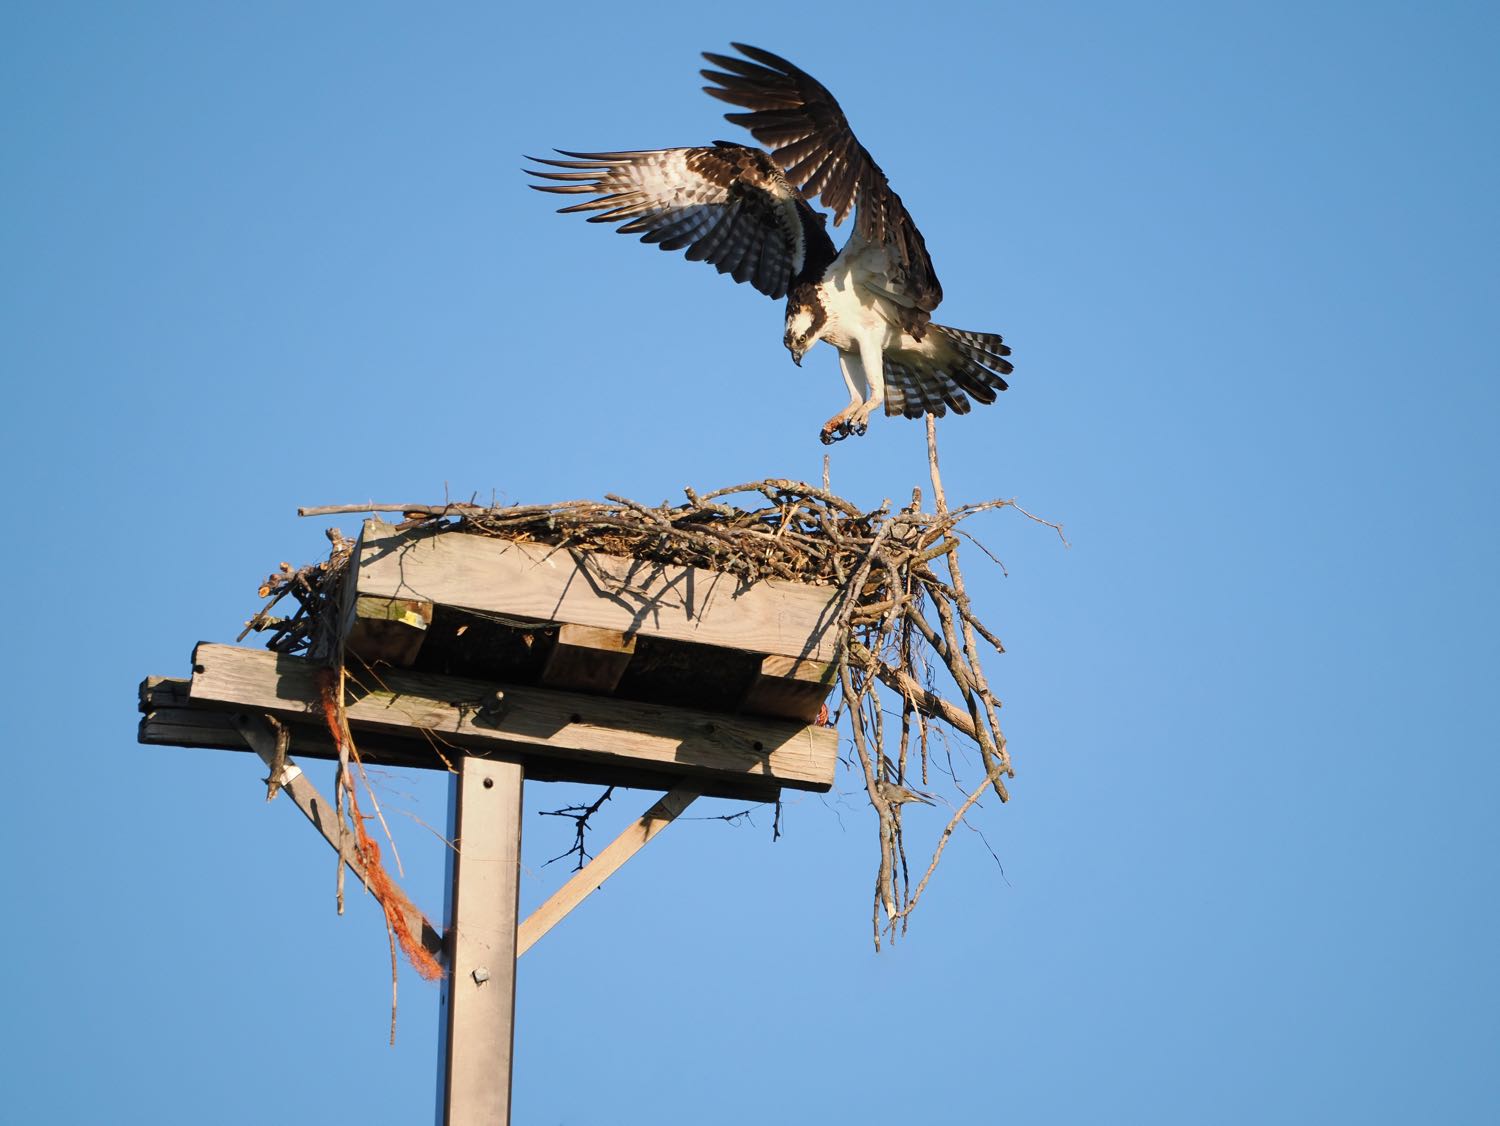 An Osprey landing at its nest, wings forward , talons out, head down, just before landing.